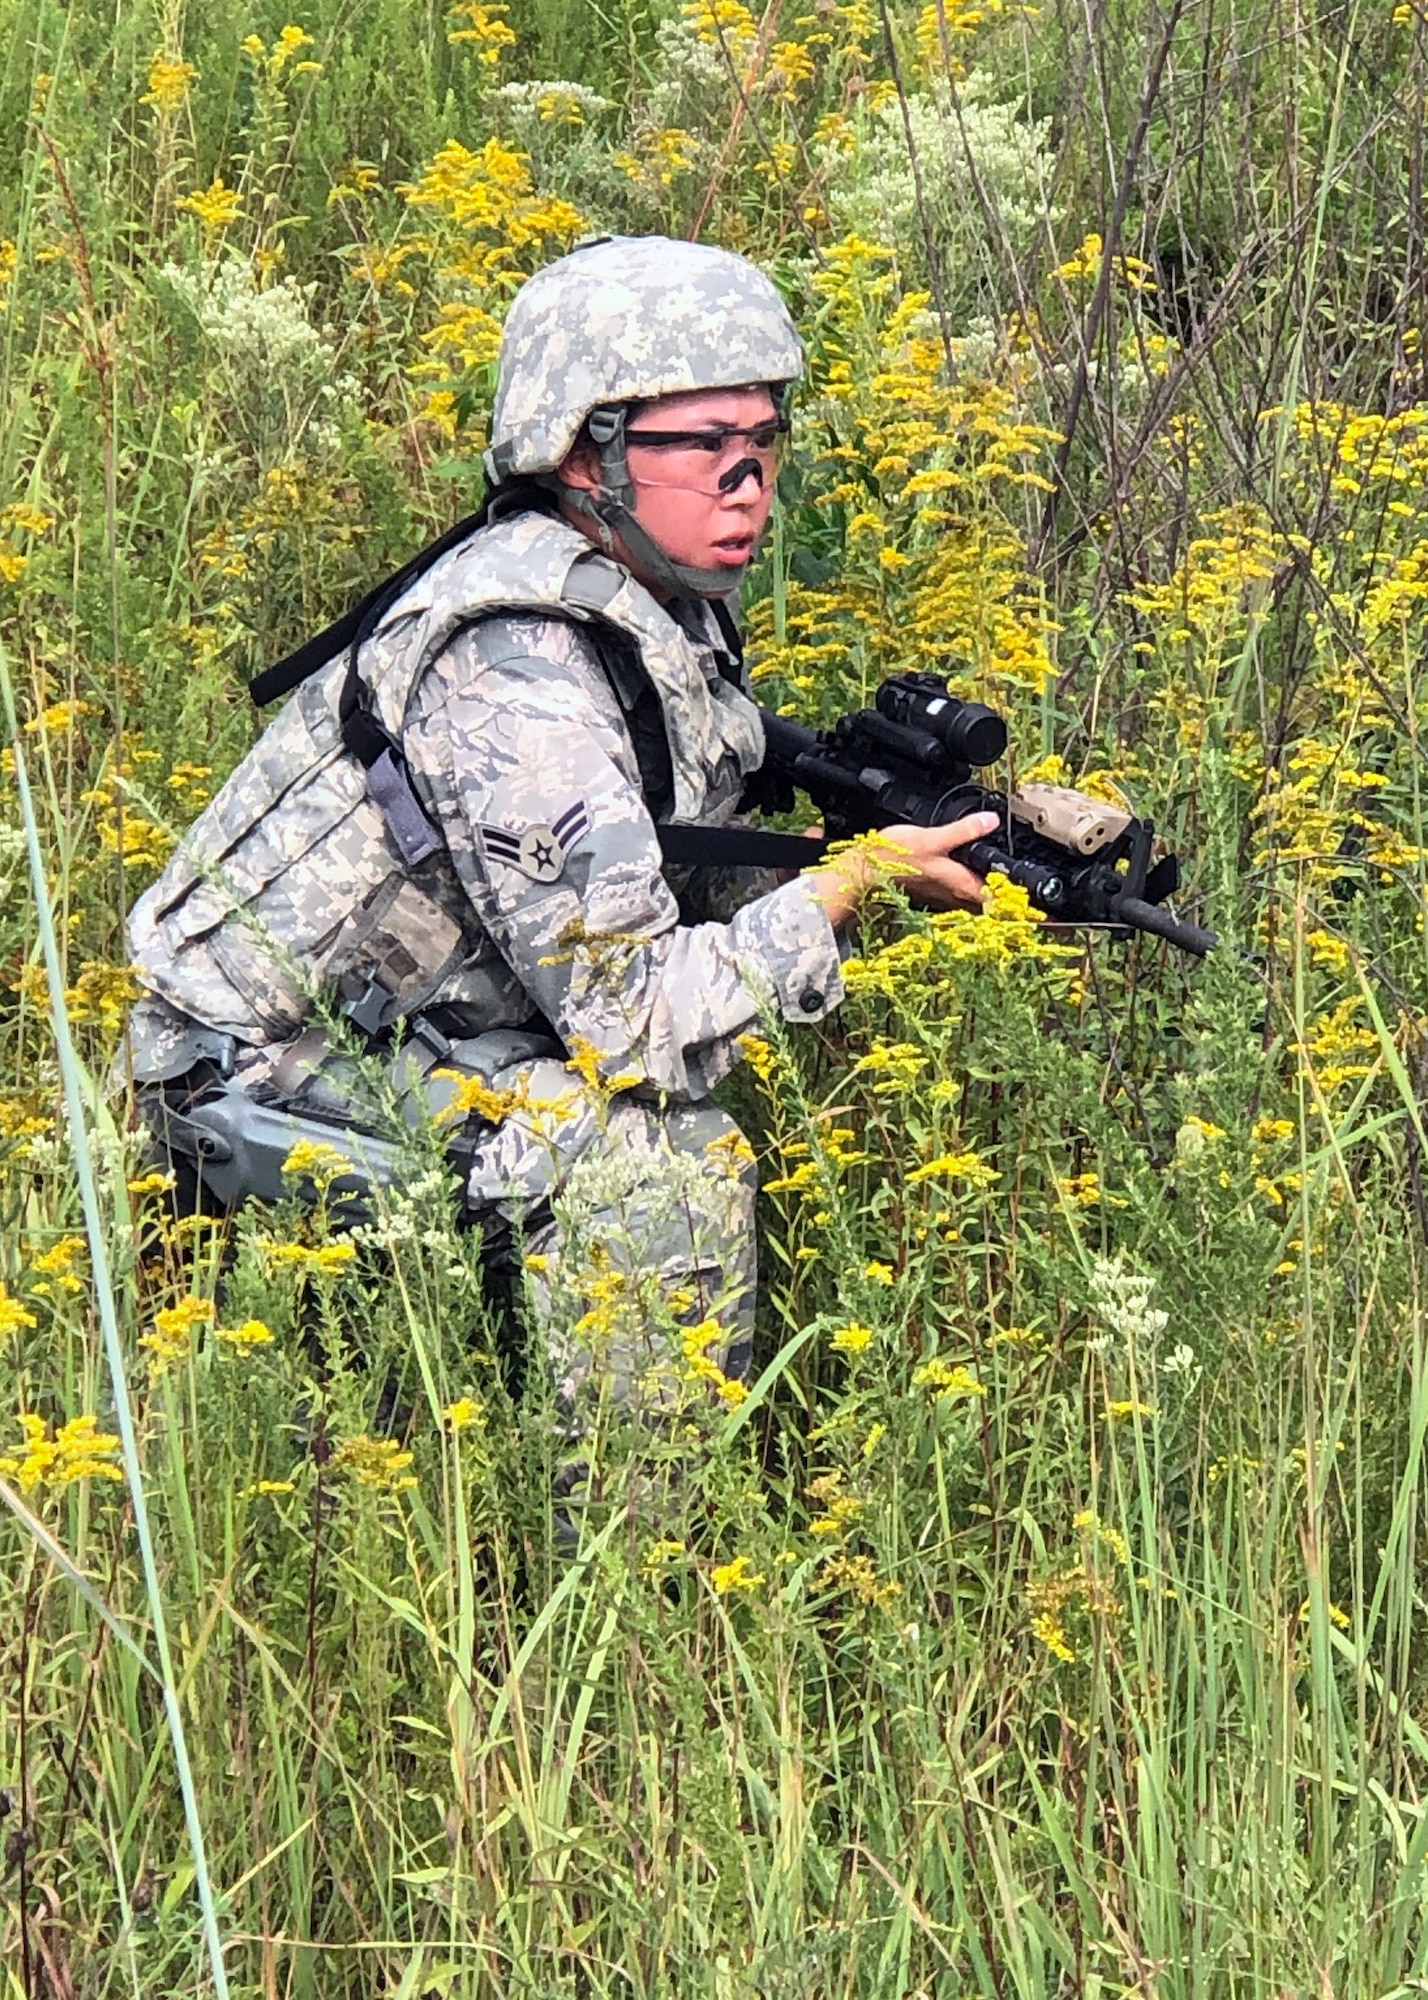 Senior Airman Ivory Lai, 459th Security Forces Squadron, participates in deployment readiness training Sept. 5, 2019 at Quantico, Va. Lai, a traditional reservist, serves as an administrative law judge for the state of New York in her civilian job. (U.S. Air Force photo/Staff Sgt. Cierra Presentado)